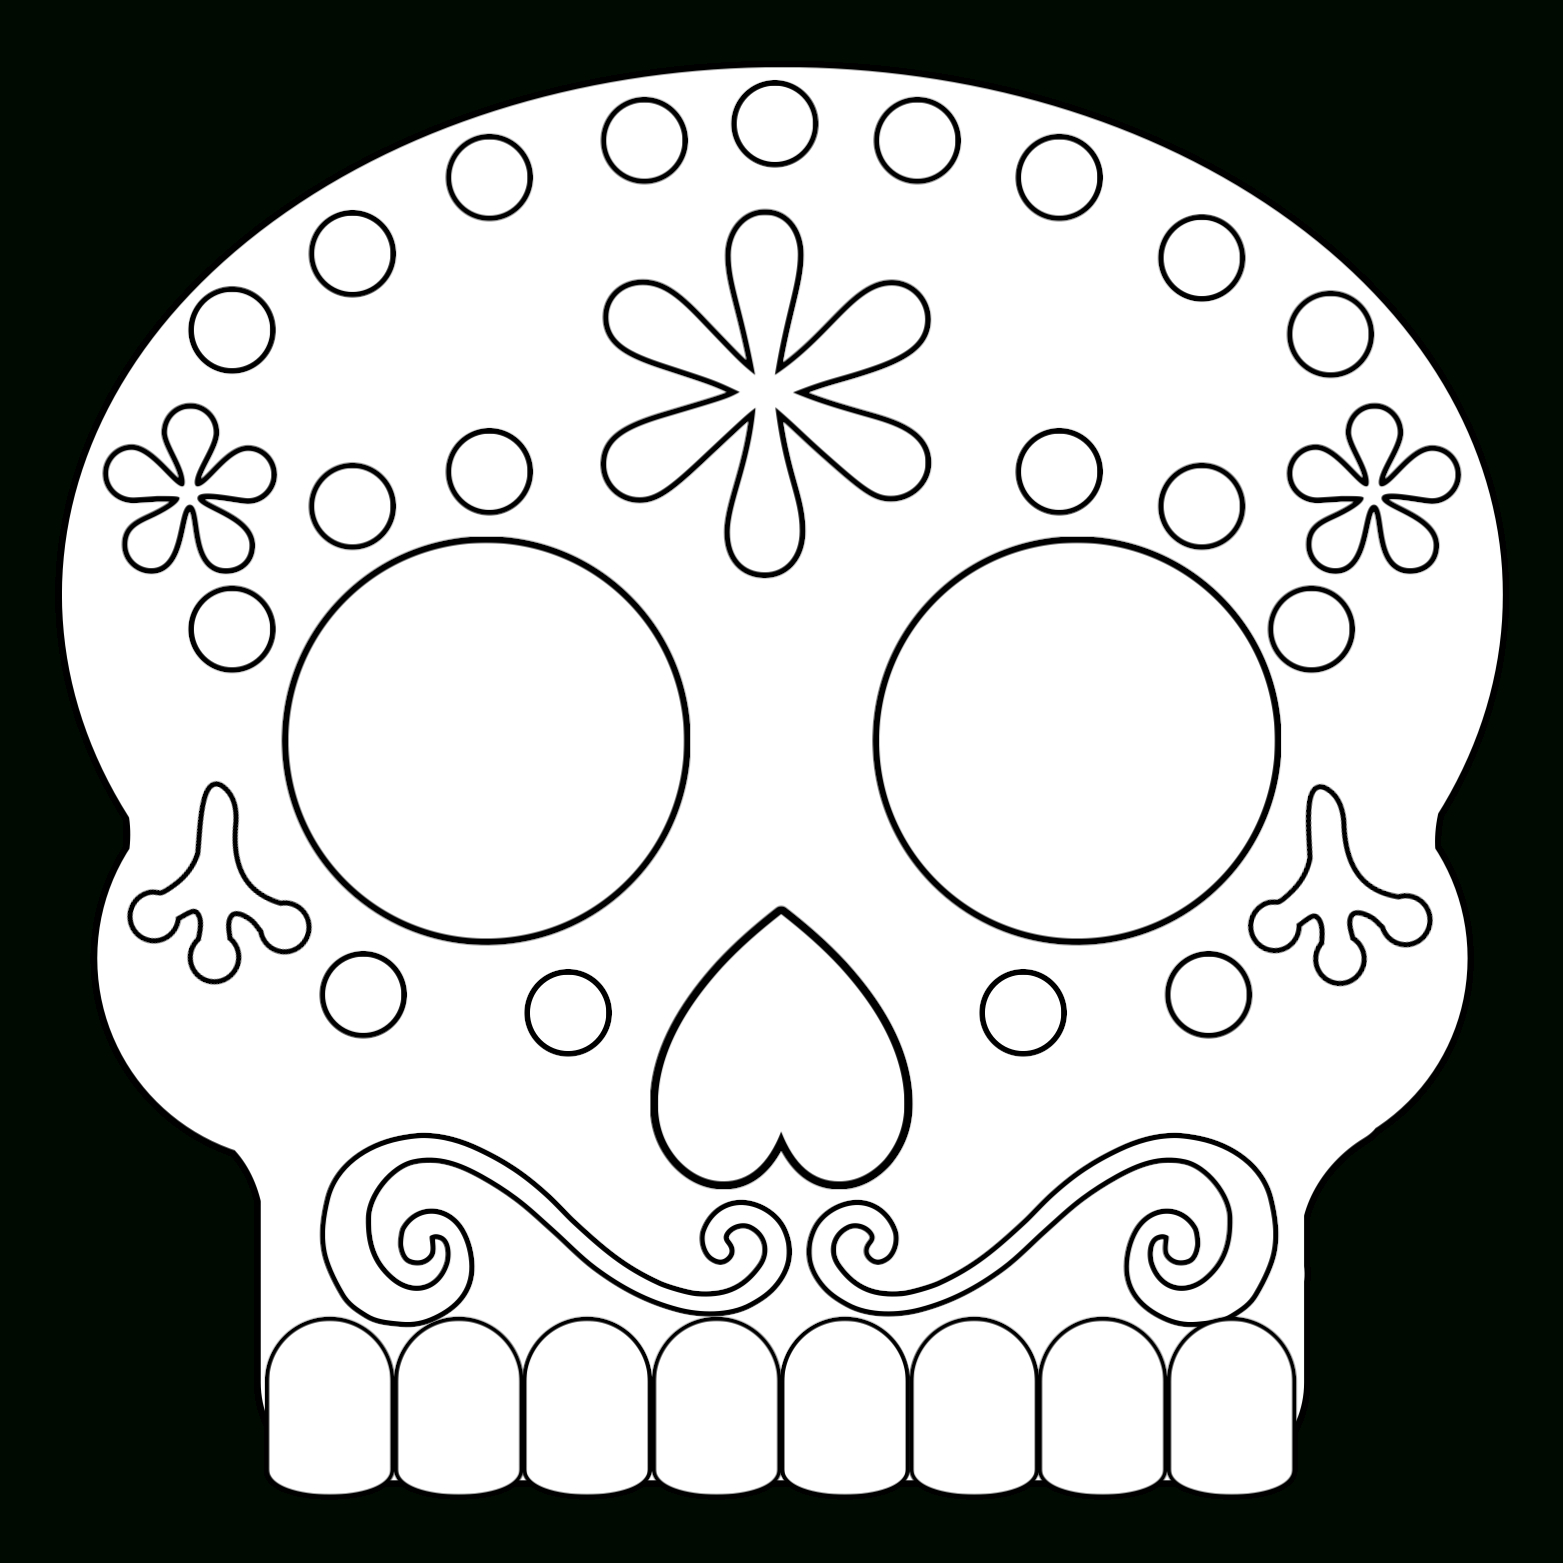 Day Of The Dead Masks Sugar Skulls Free Printable - Paper Trail Design - Free Printable Sugar Skull Day Of The Dead Mask